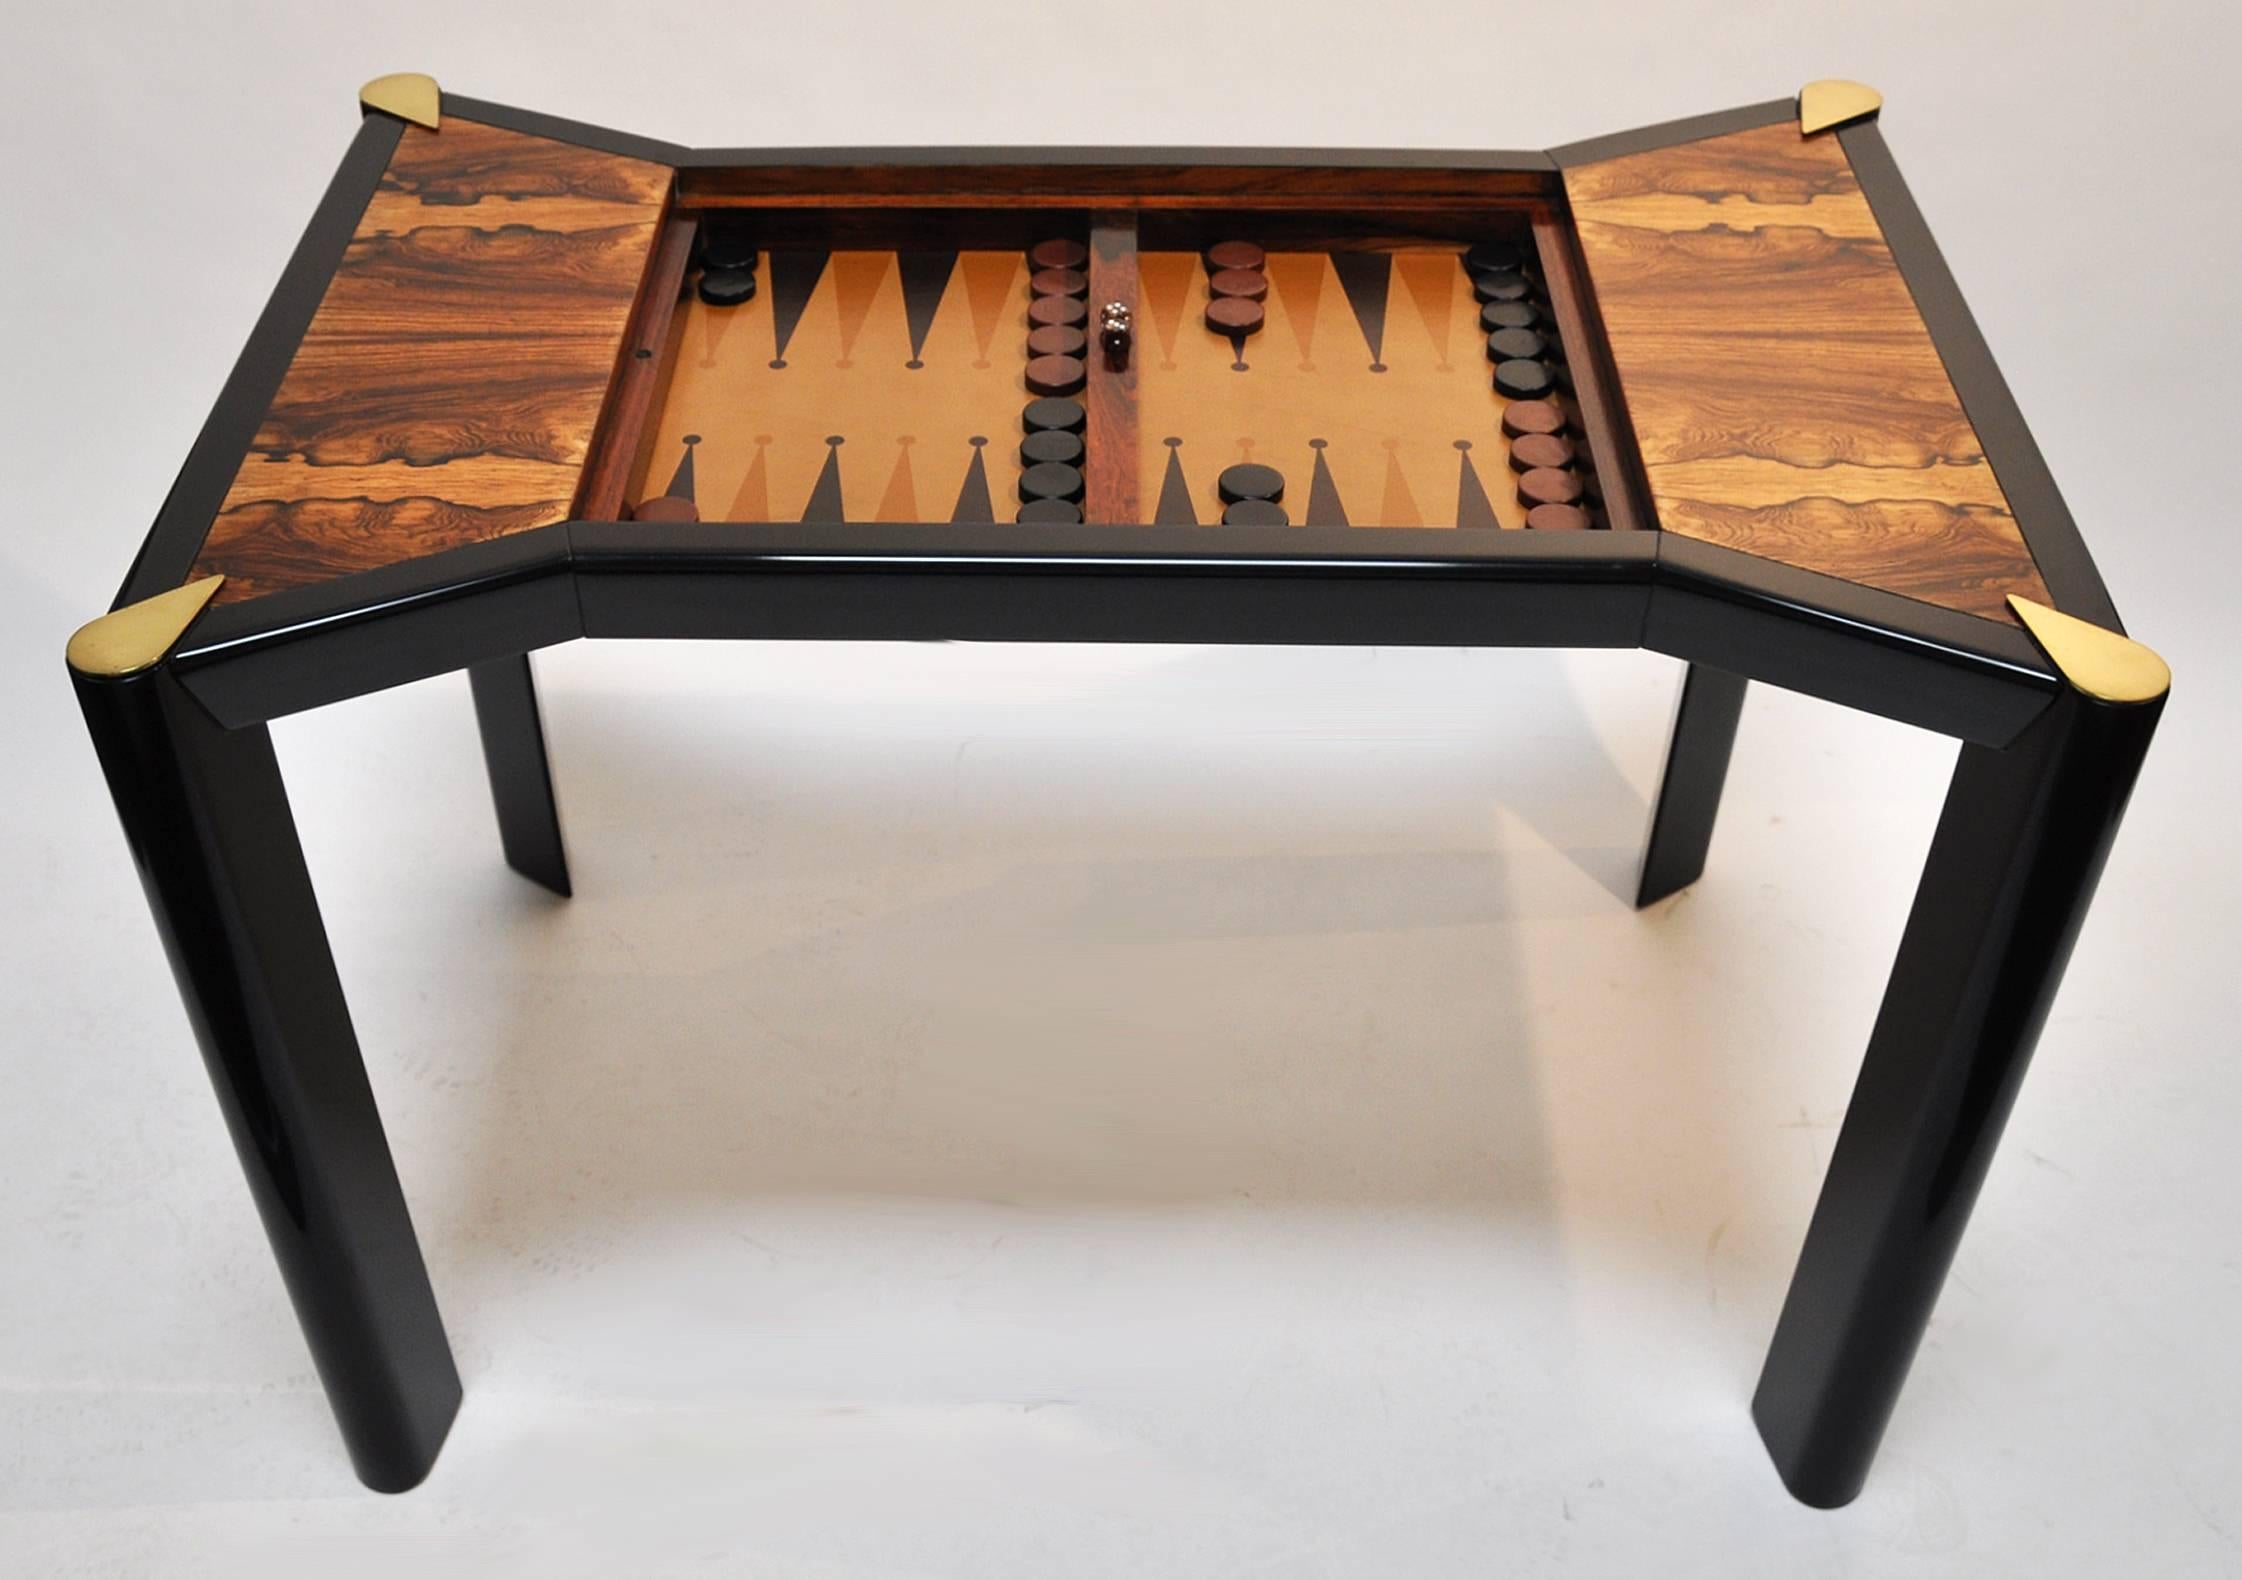 Hand-Crafted 1970s Italian Game Table, Backgammon, Chess, Checkers